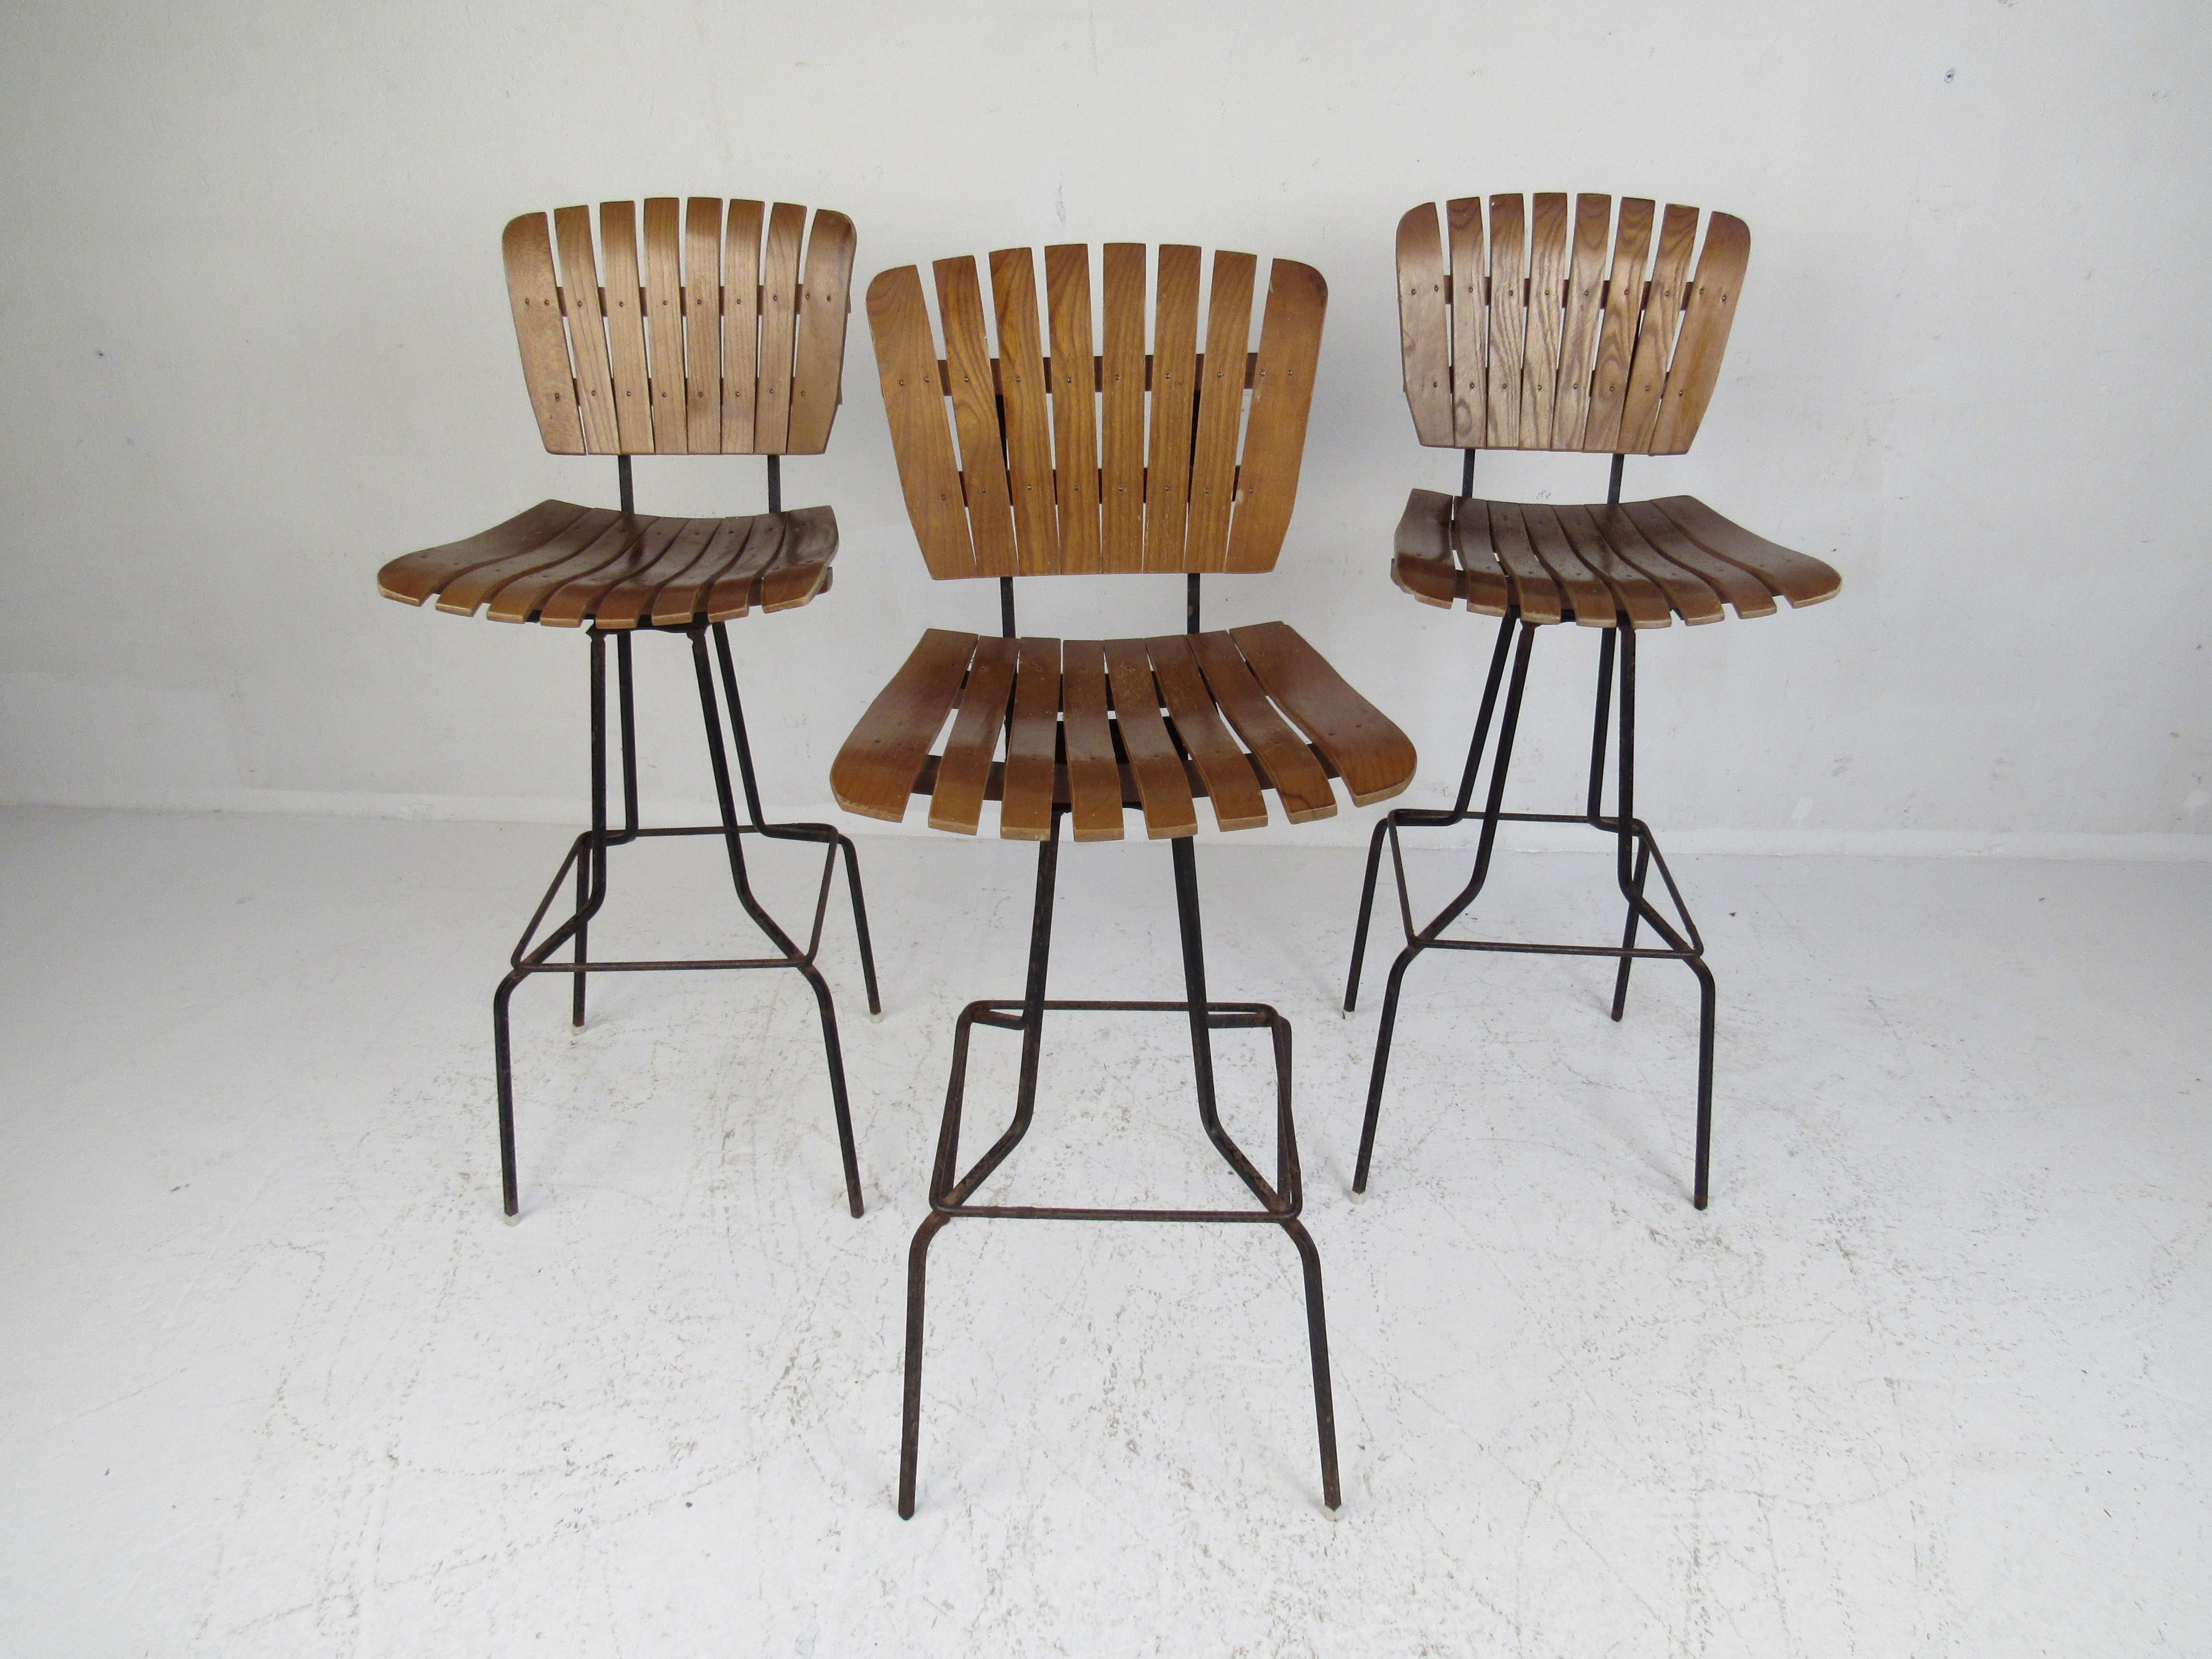 A striking midcentury set of three bar stools that boast slatted wood seats and backrests. The sturdy iron rod base tapers down to splayed feet showing quality construction. A conveniently placed iron footrest ensures comfort in any seating